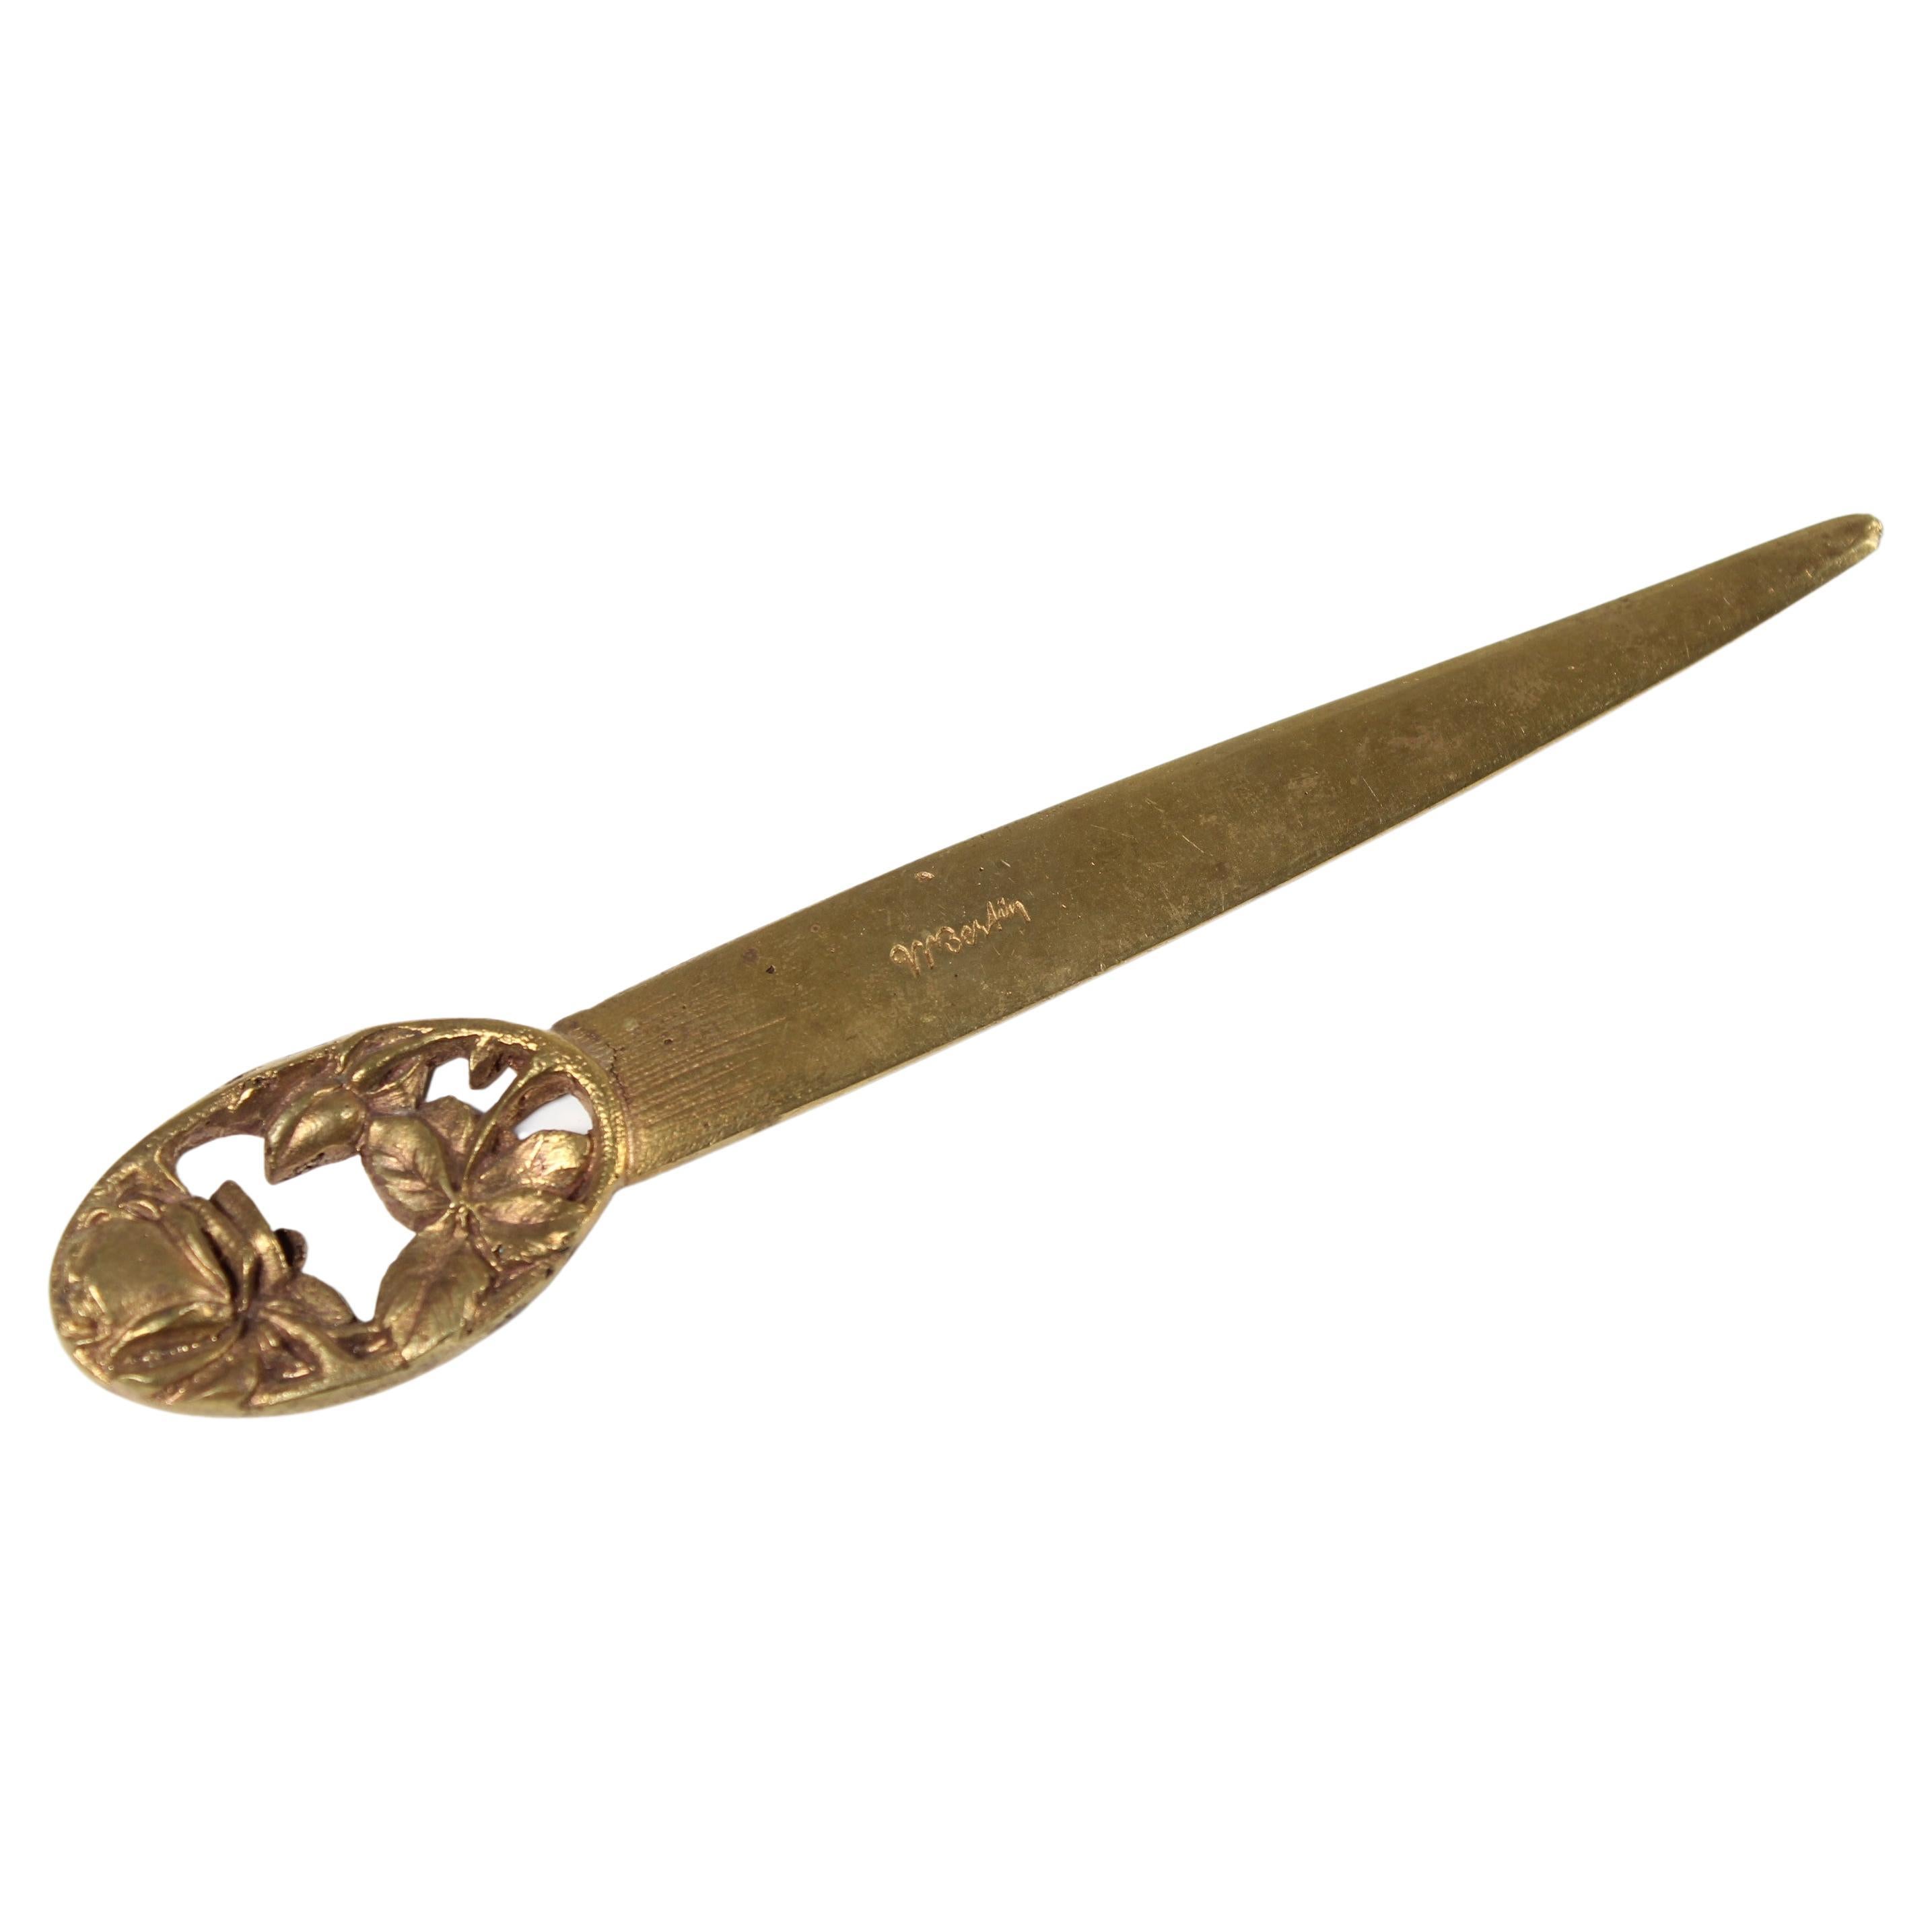 Antique Letter Opener with Signature